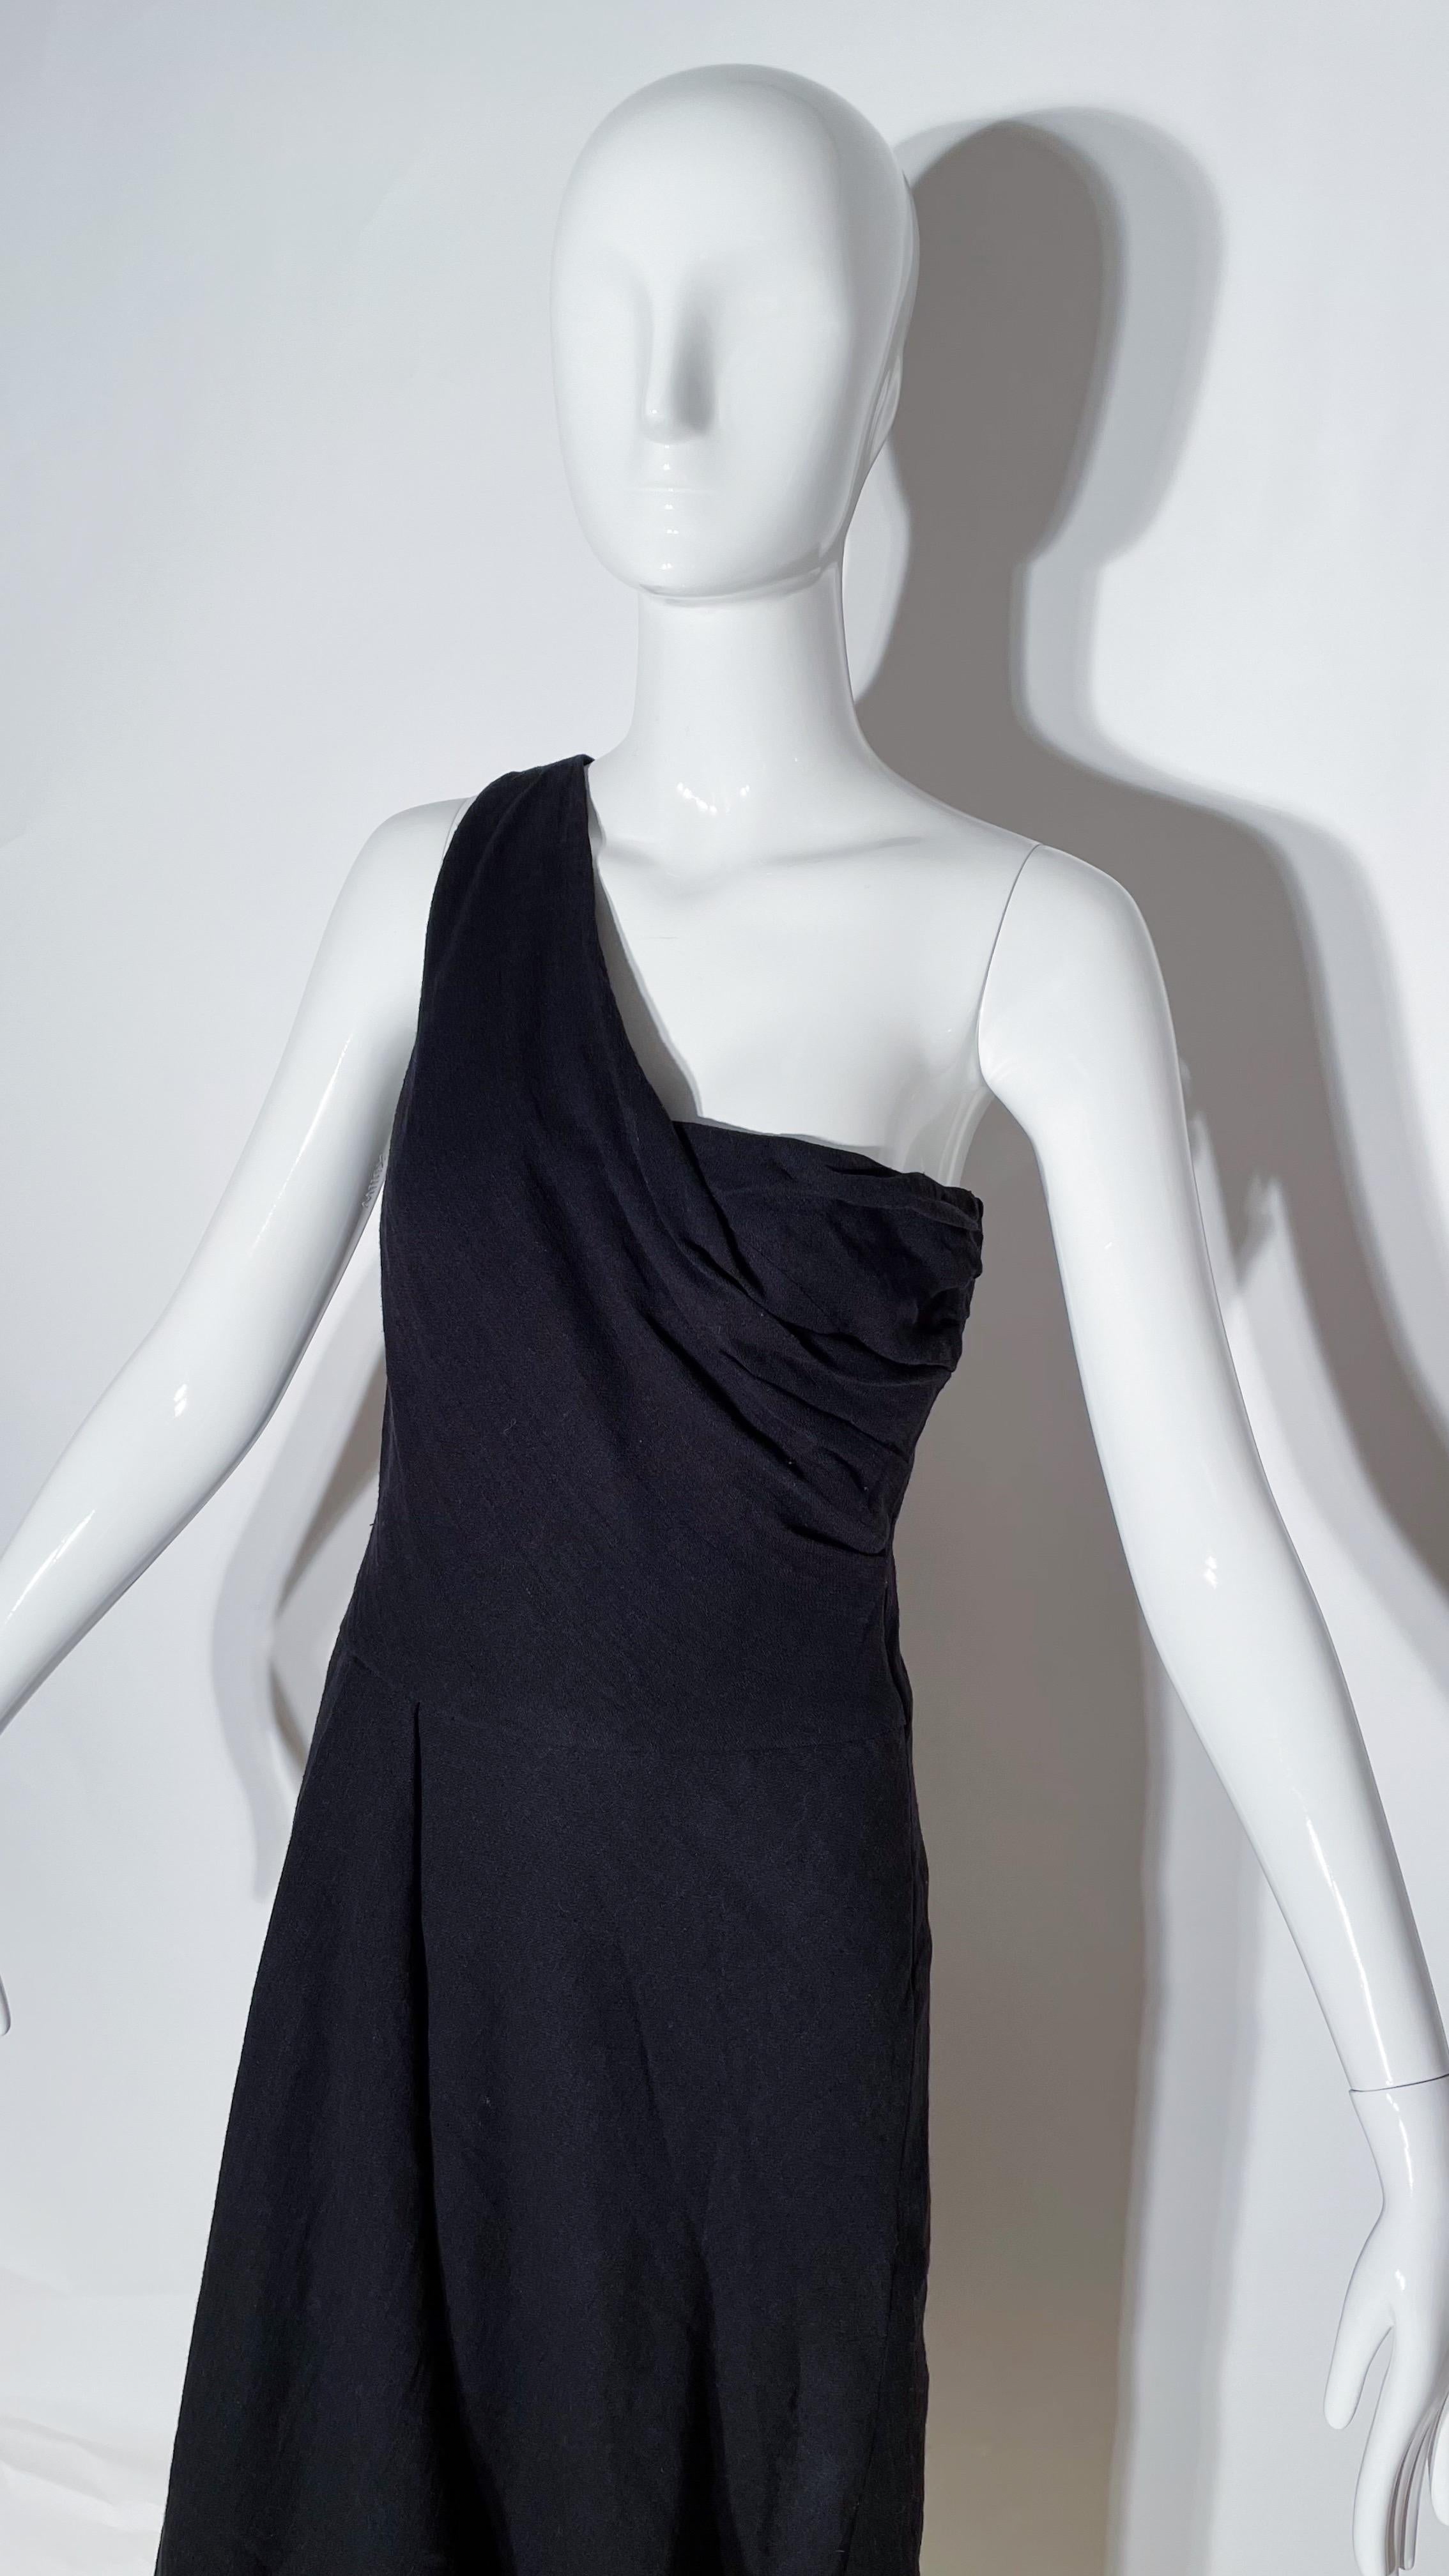 Black one shoulder dress. Ruched neckline. Side zipper closure. Linen. Lined.
*Condition: excellent vintage condition. No visible flaws.

Measurements Taken Laying Flat (inches)—
Bust: 30 in.
Waist: 26 in.
Hip: 34 in.
Length: 45 in.
Marked size: 2